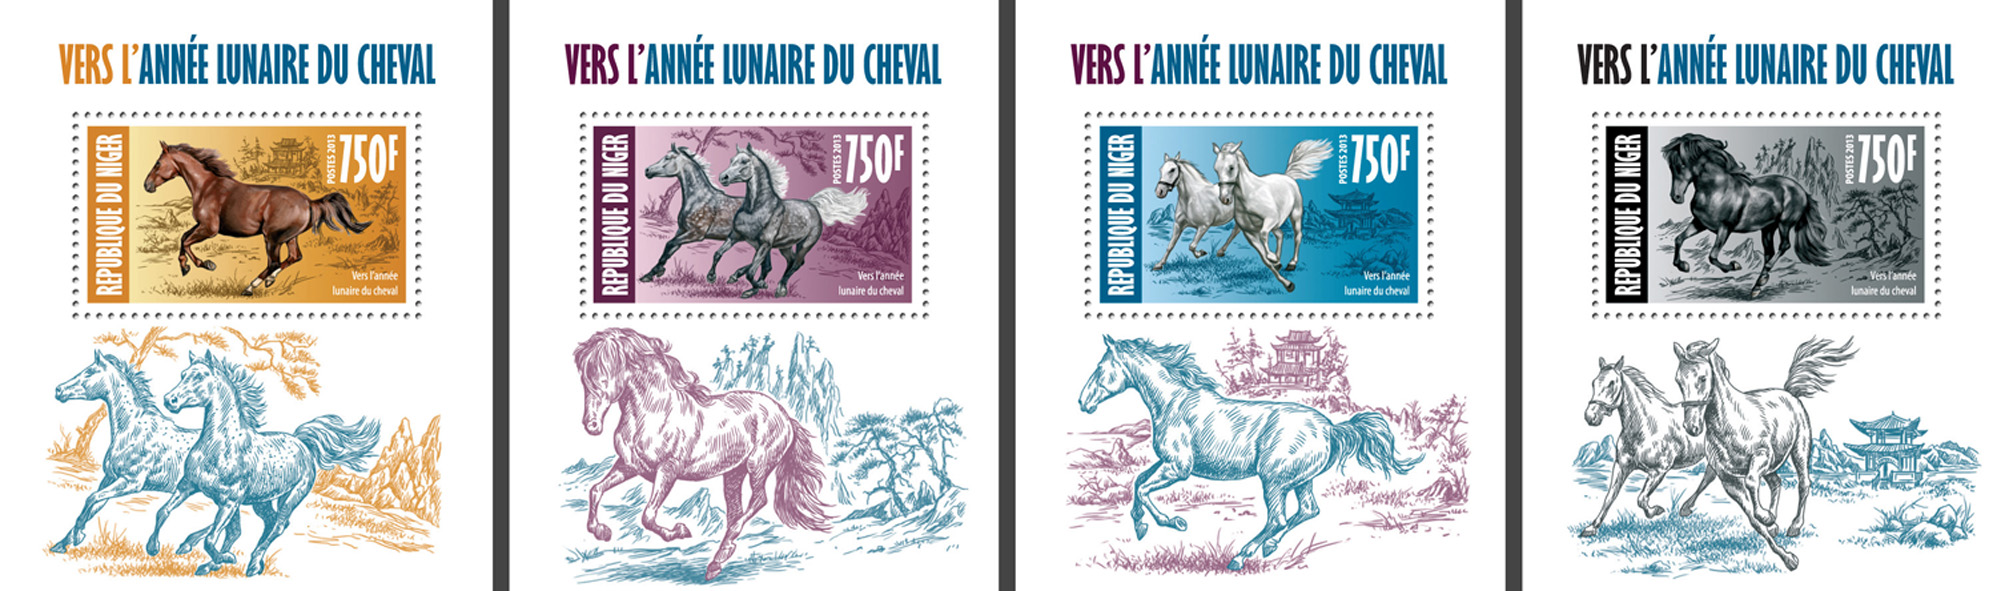 Year of the horse - Issue of Niger postage stamps